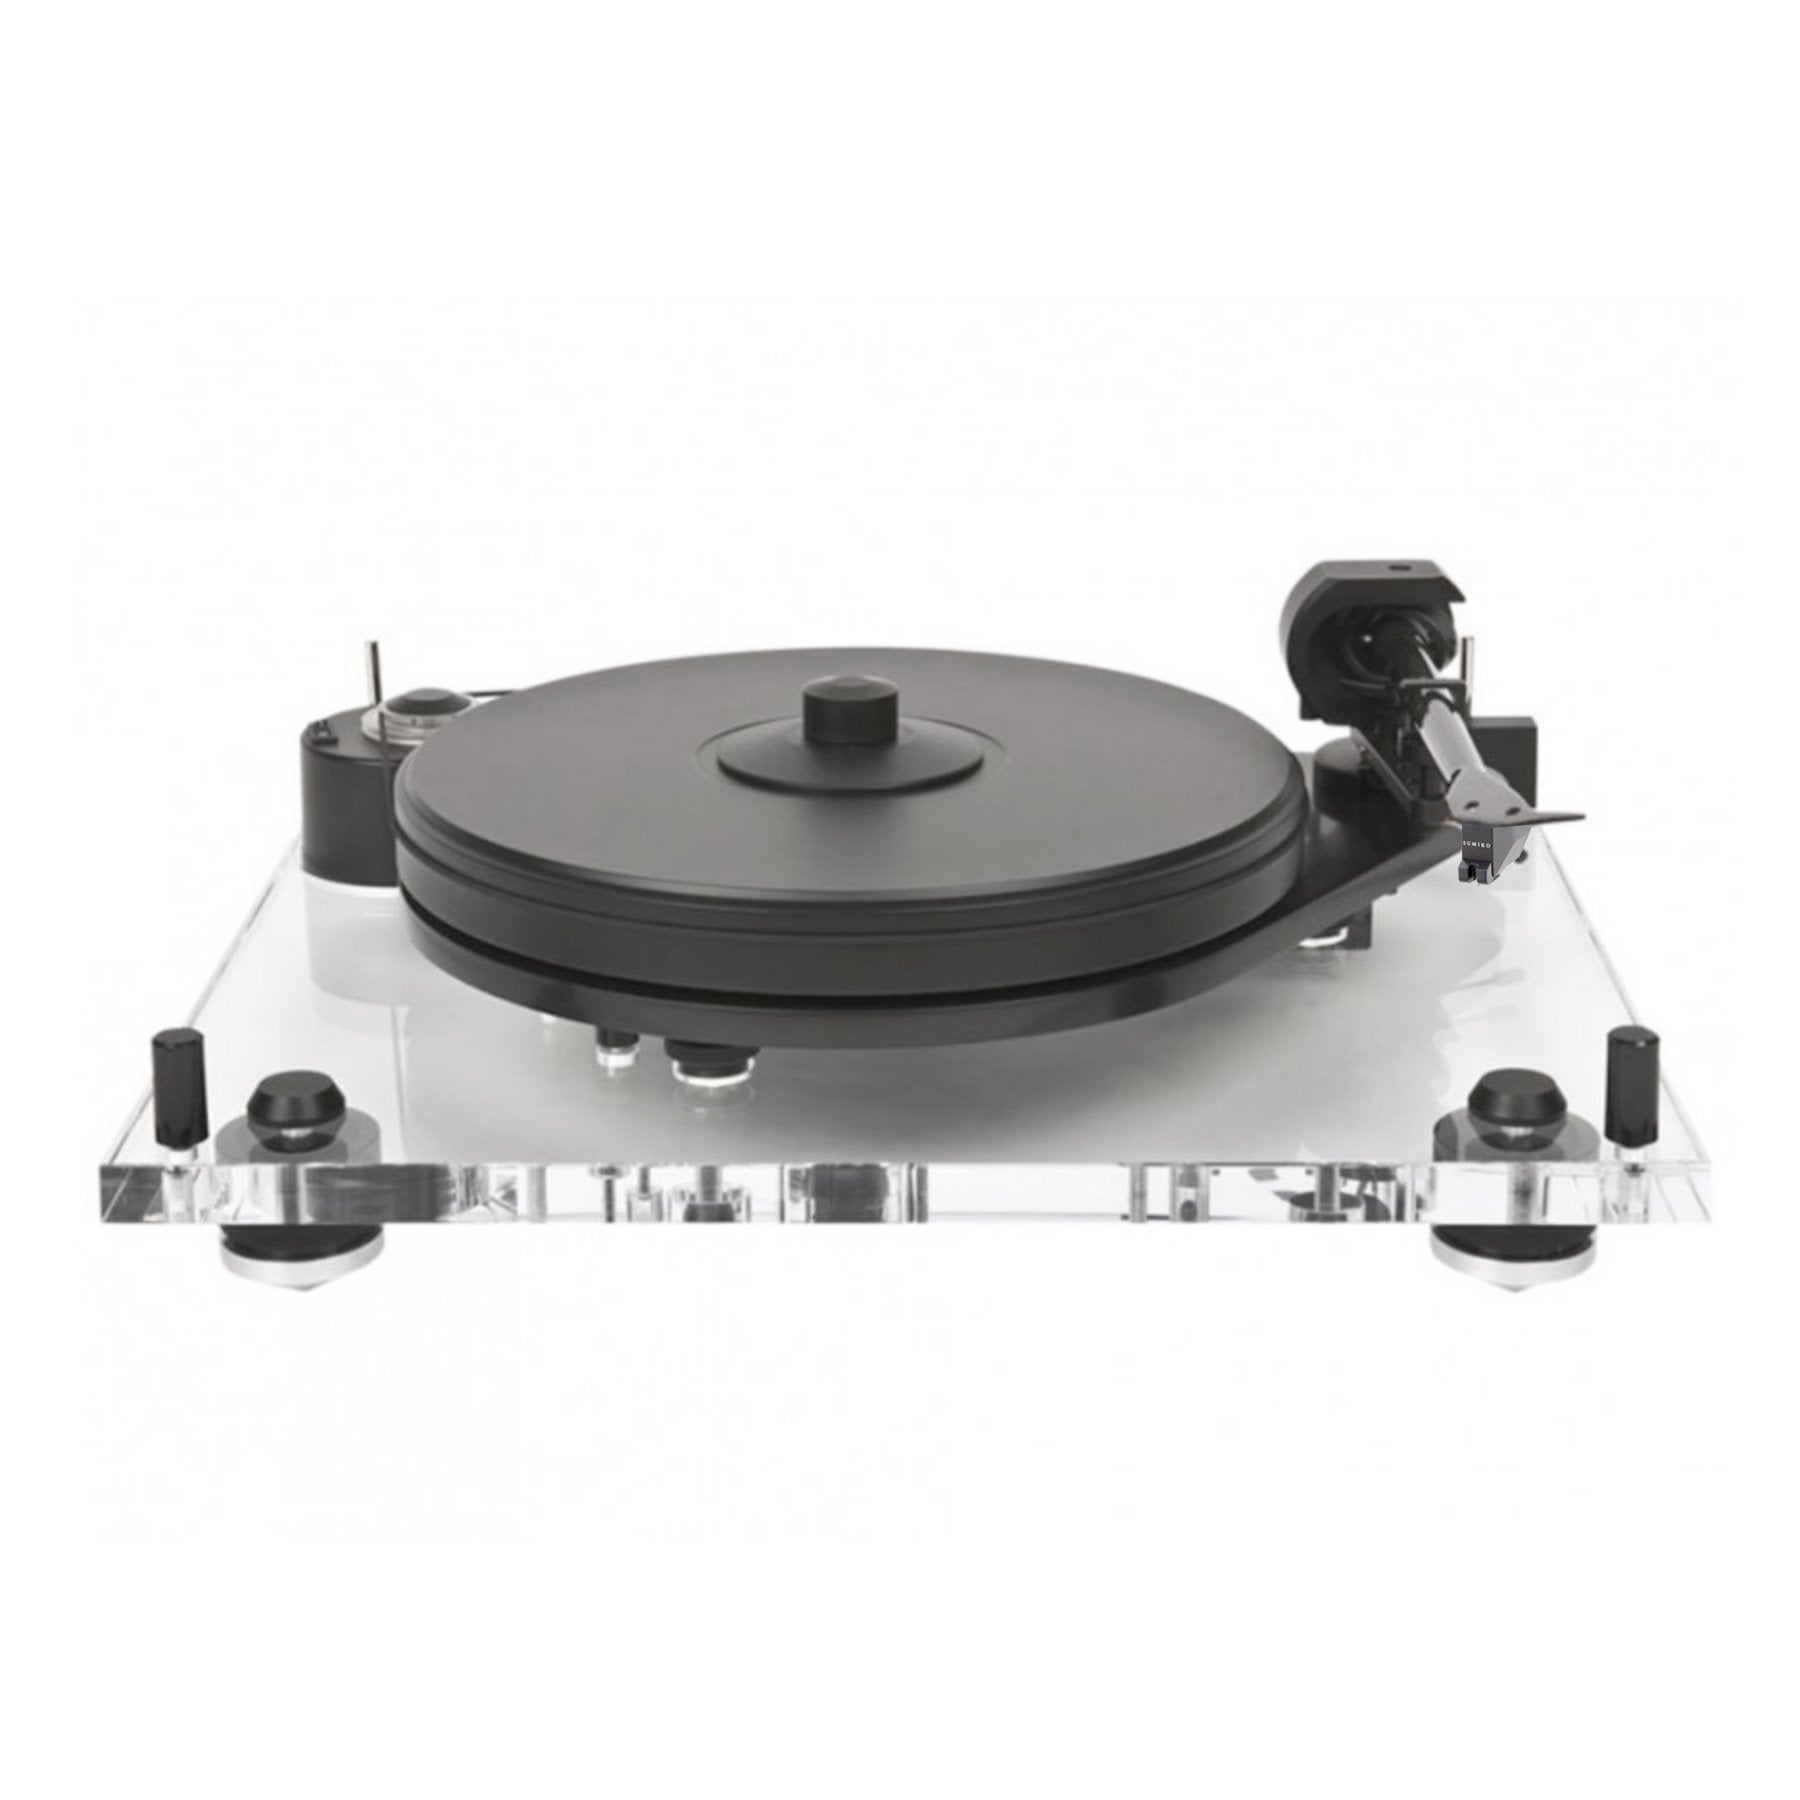 Pro-Ject: 6Perspex SB Acrylic Turntable w/Sumiko Amethyst (Installed)